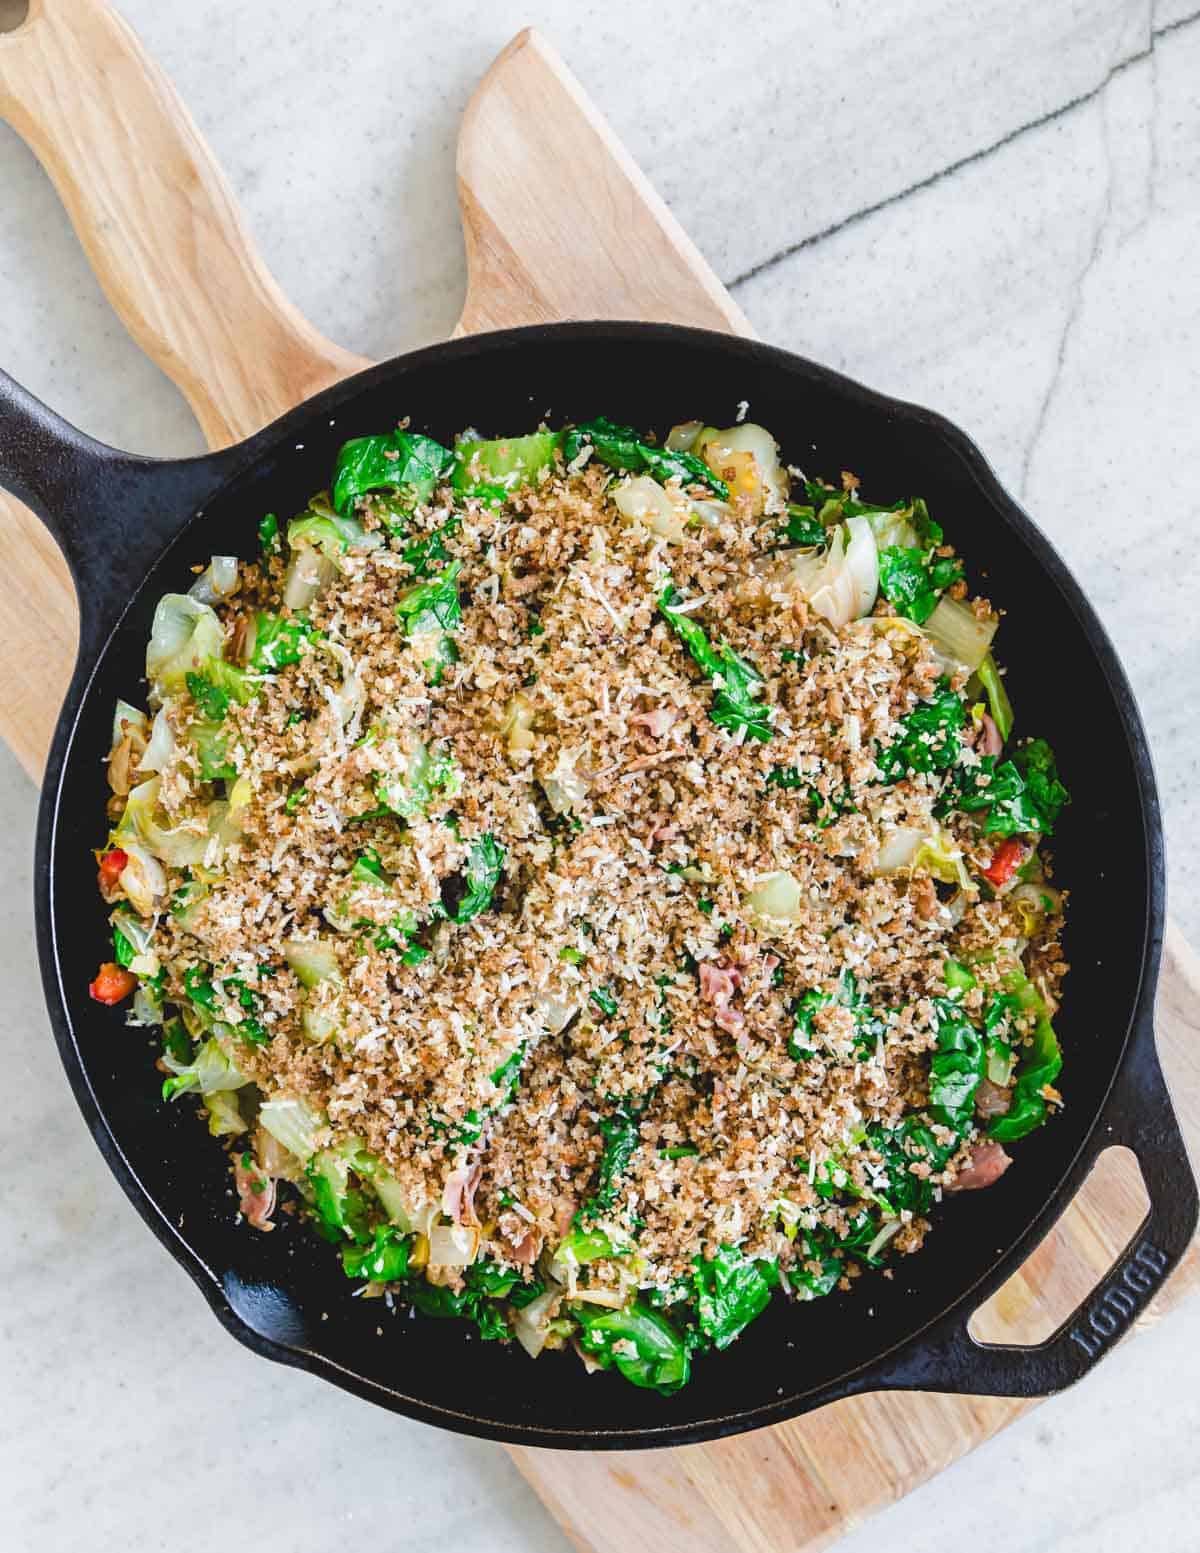 Utica greens topped with breadcrumb mixture before broiling in a cast iron skillet.